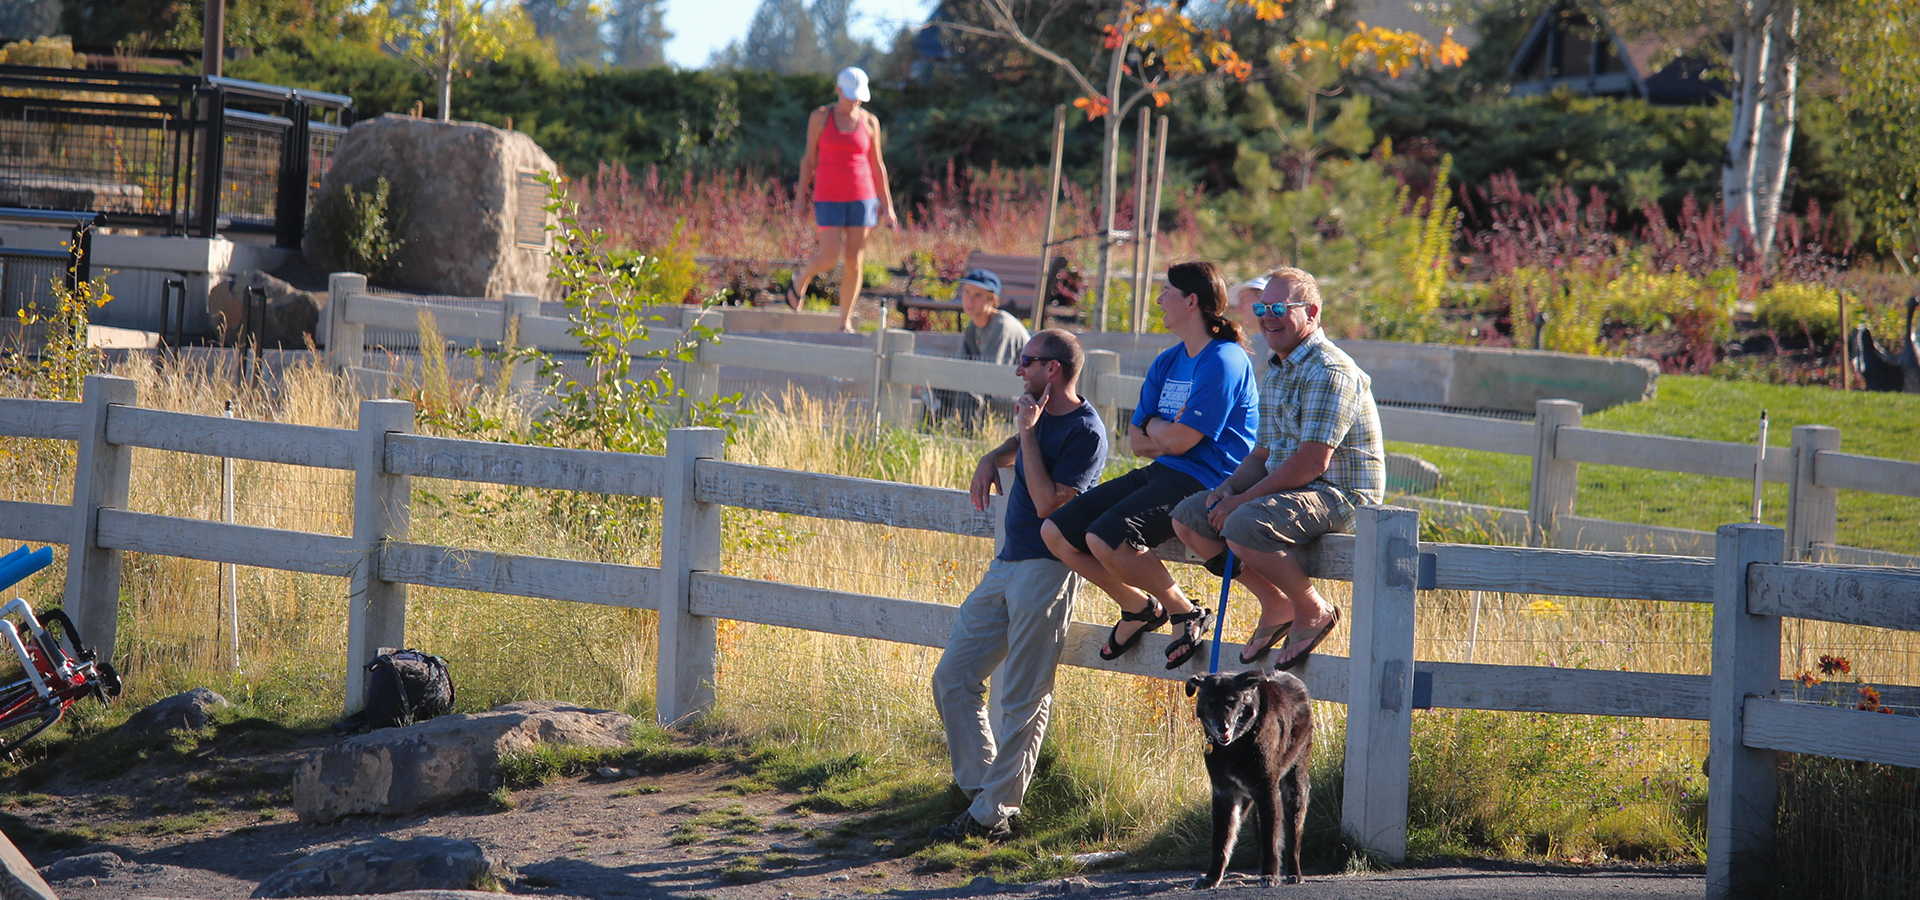 Three people and a dog watching surfers at McKay Park.